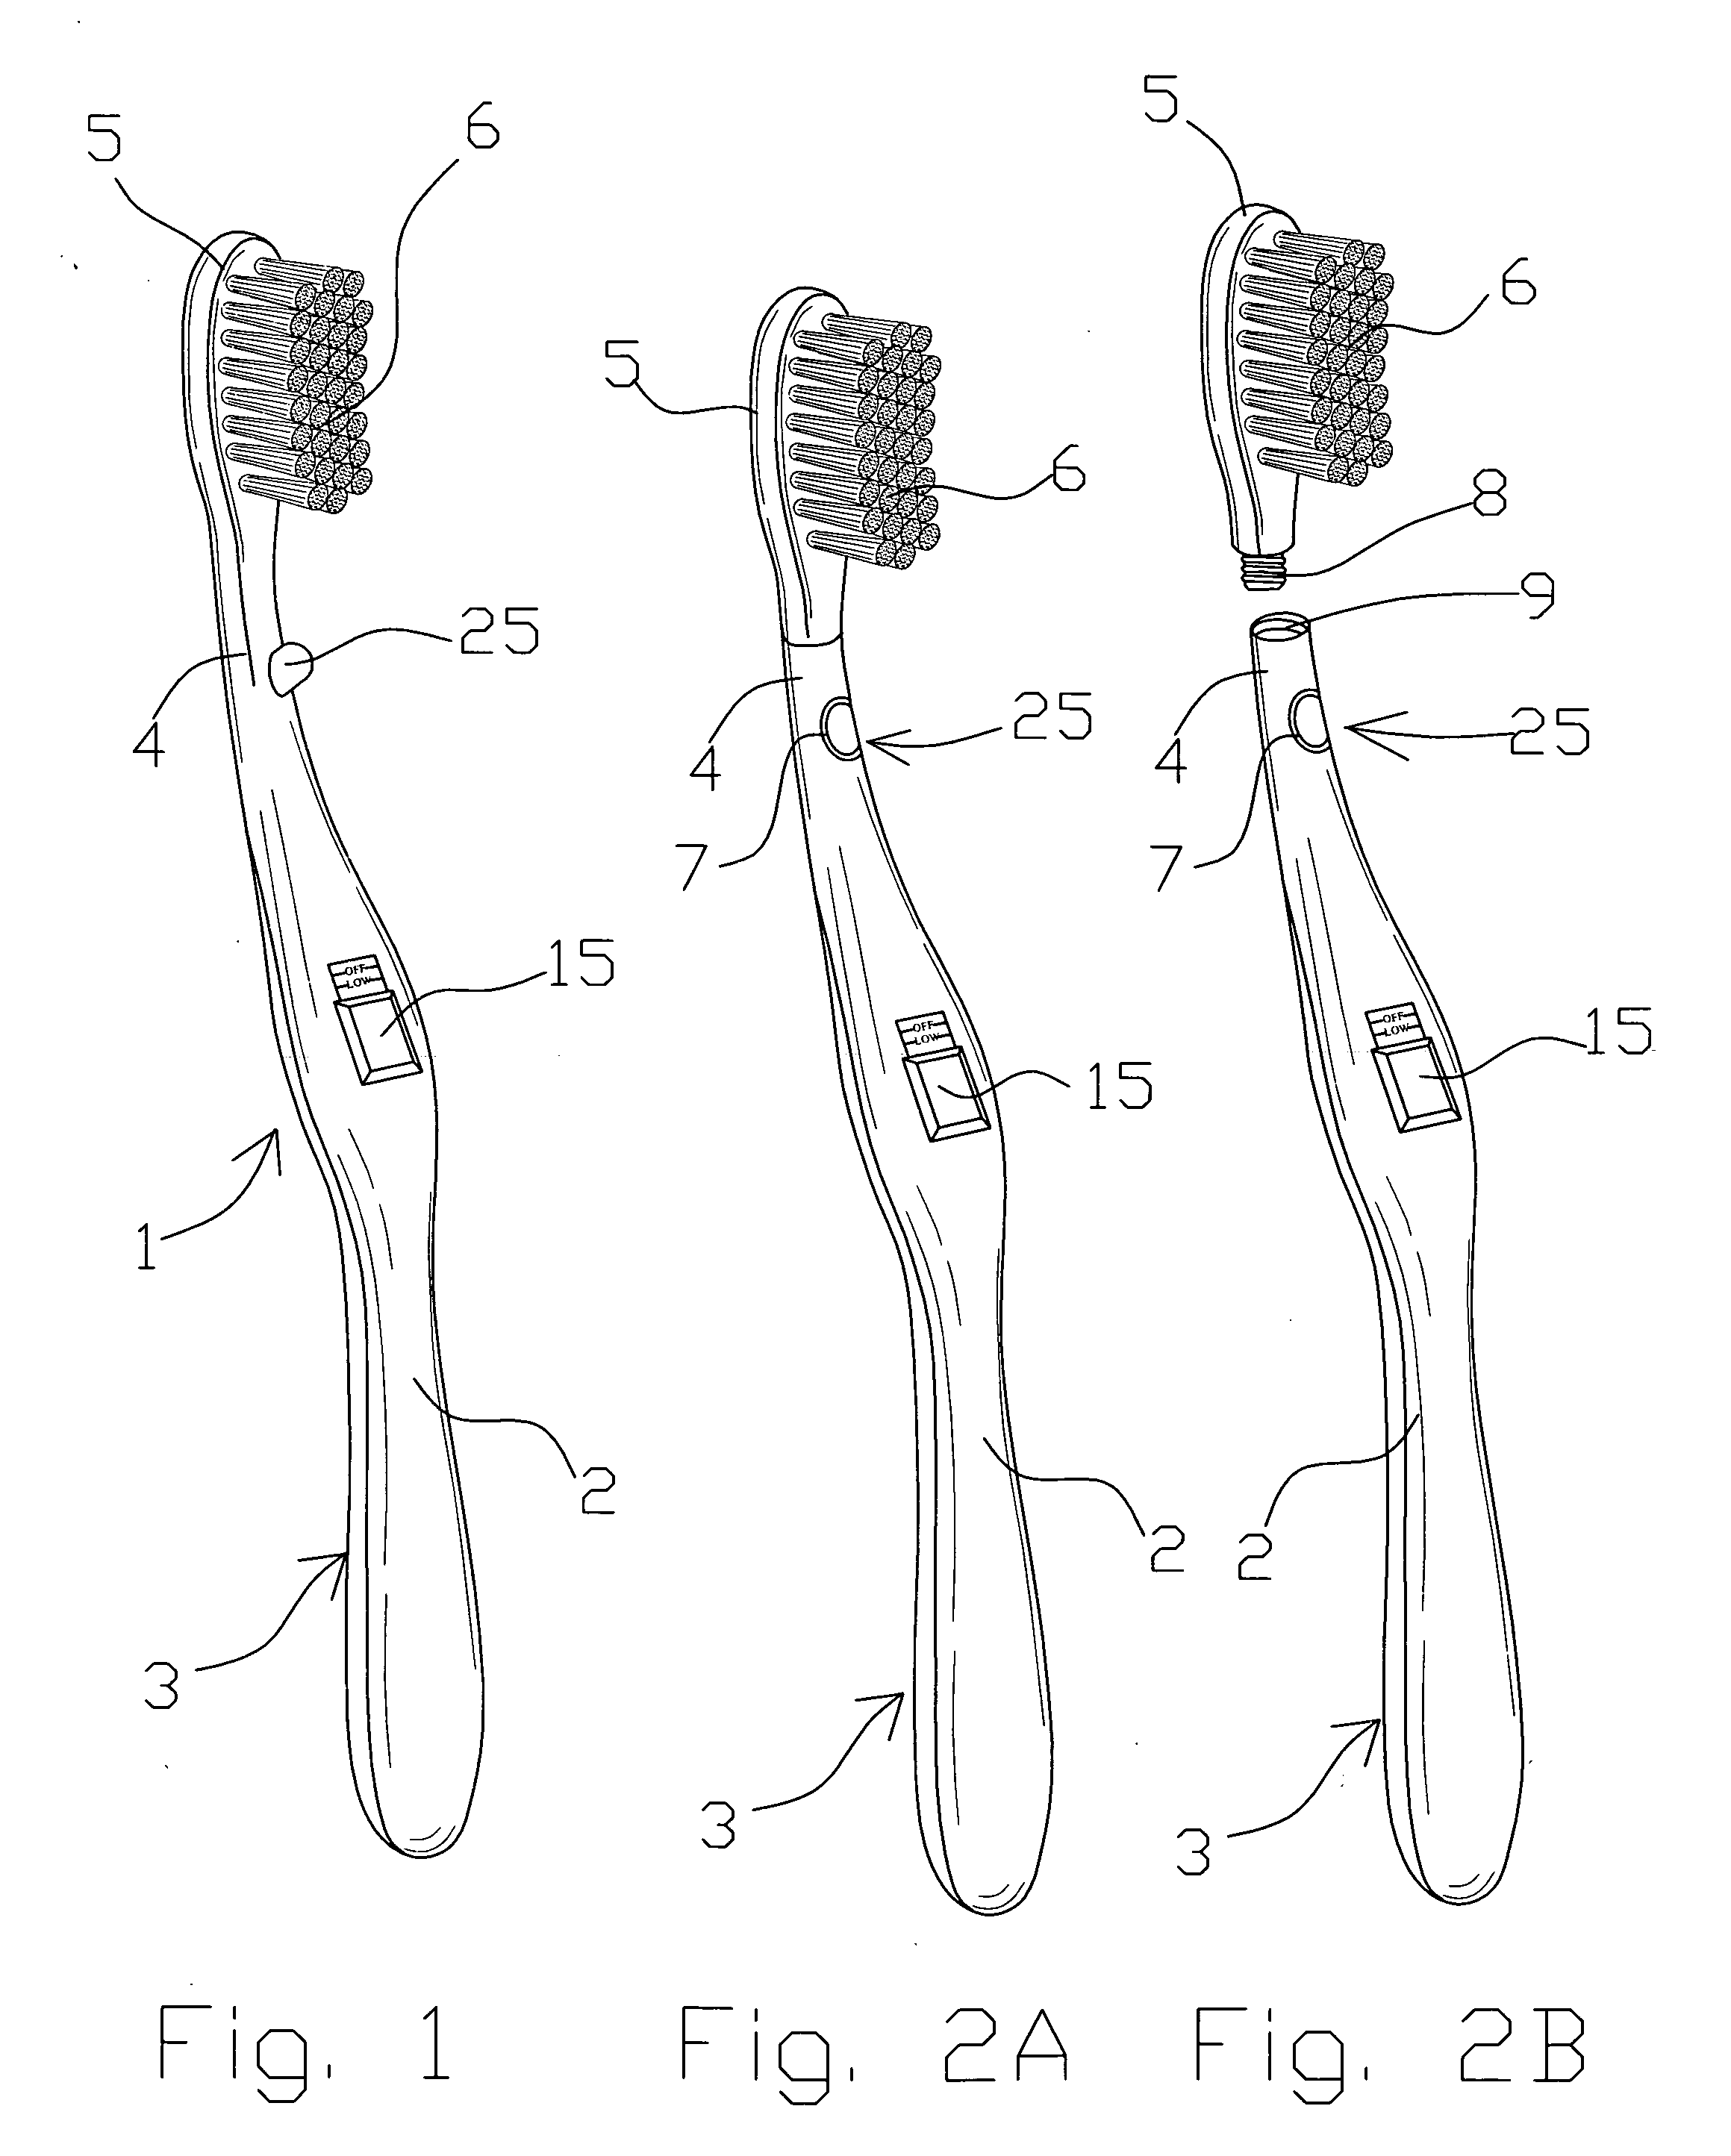 Toothbrush with light source for illuminating oral cavity